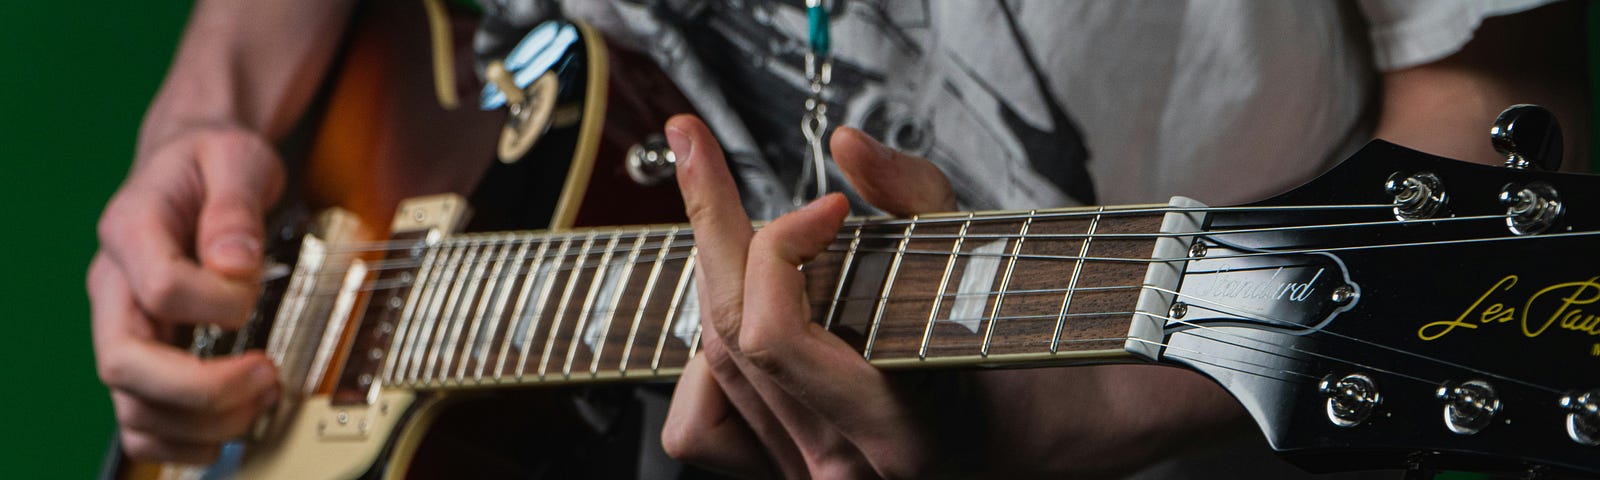 A young teen wearing a grey t-shirt is playing an electric guitar, working on fingering and strumming.